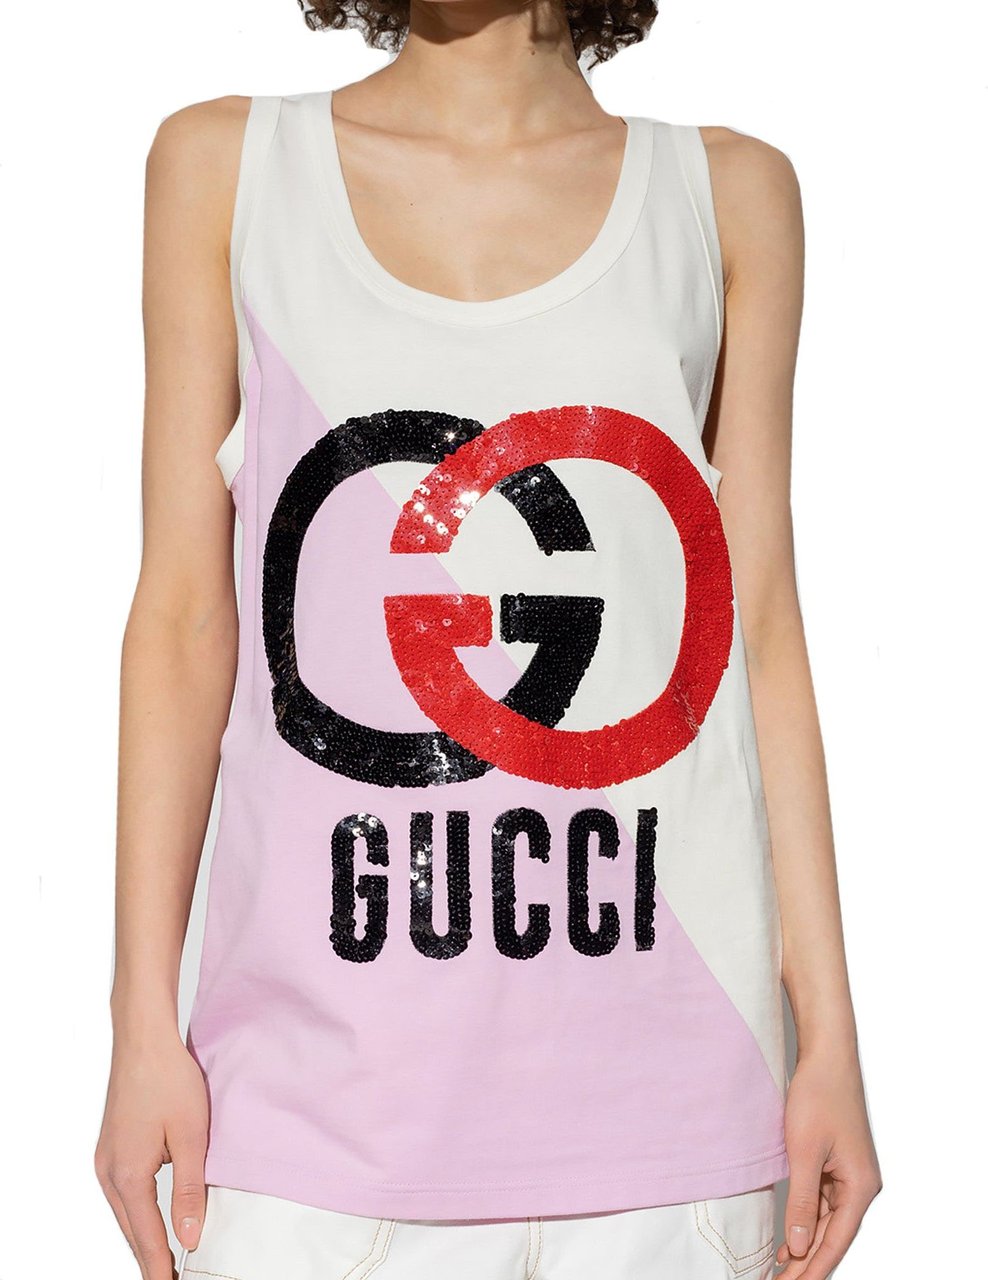 Gucci Gucci Sleeveless Top Wit